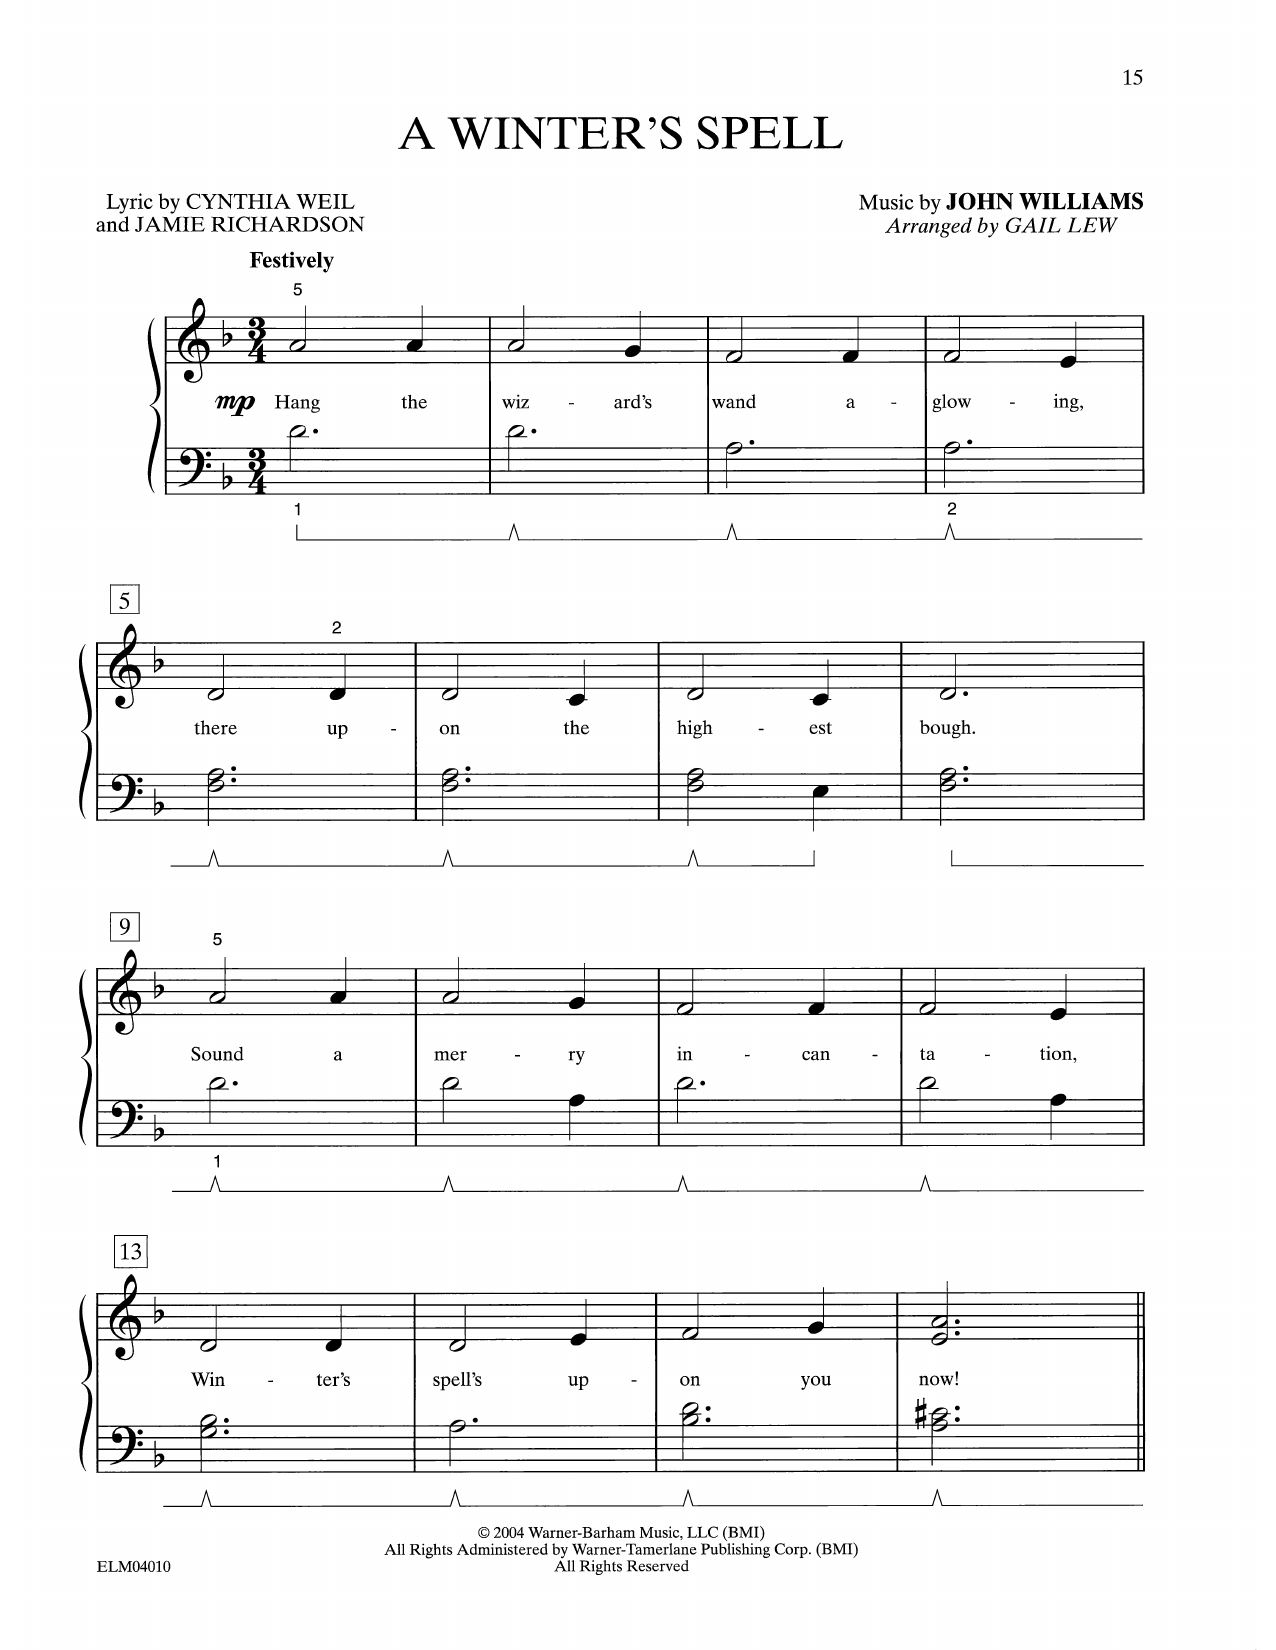 Download John Williams A Winter's Spell (from Harry Potter) (a Sheet Music